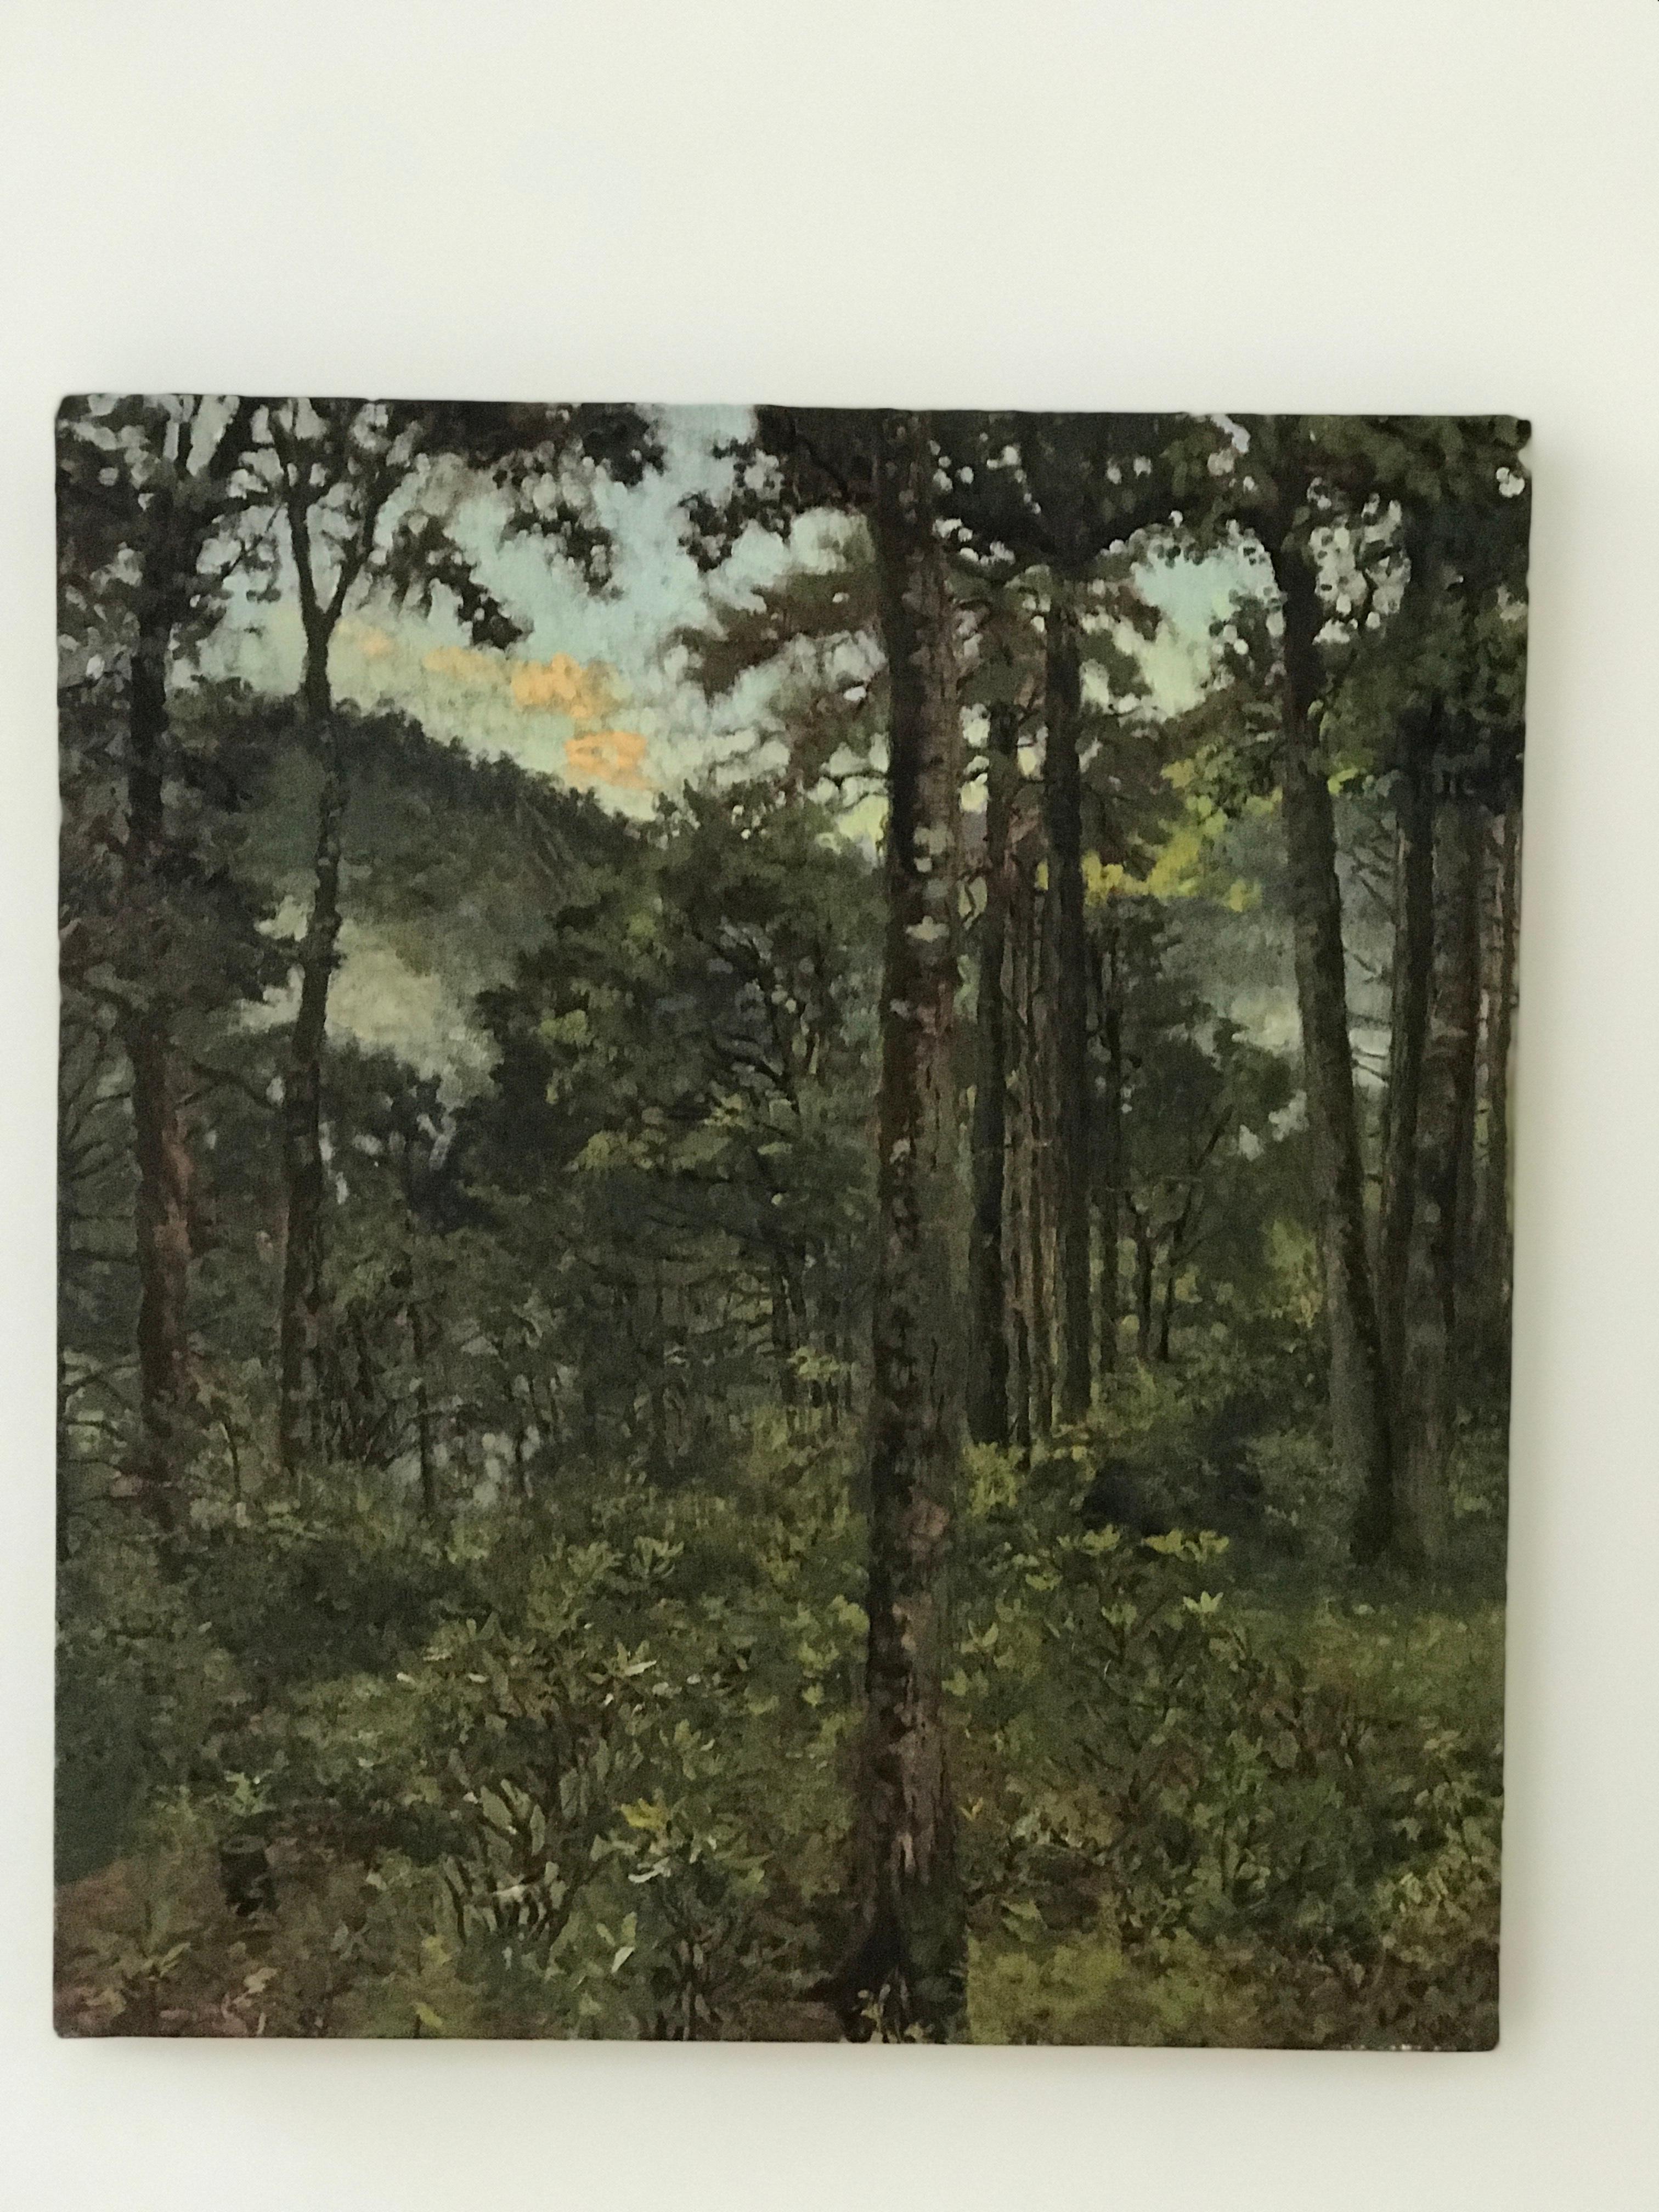 Cashiers, (a landscape in the Barbizon tradition) - Painting by Kathryn Keller